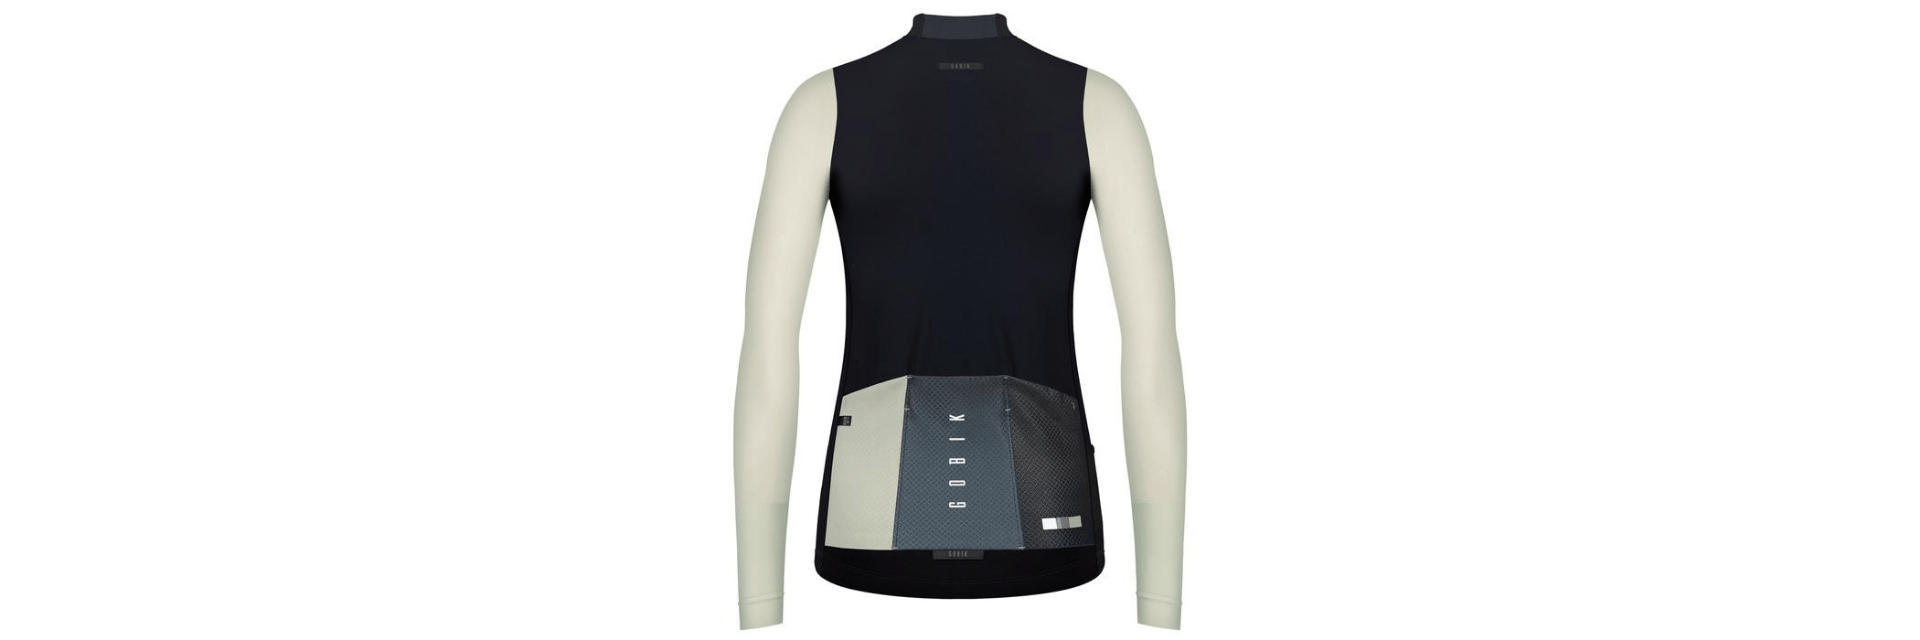 Chaqueta Mujer Mist Seagrass Cold Series 2022 Gobik 1 700x.png